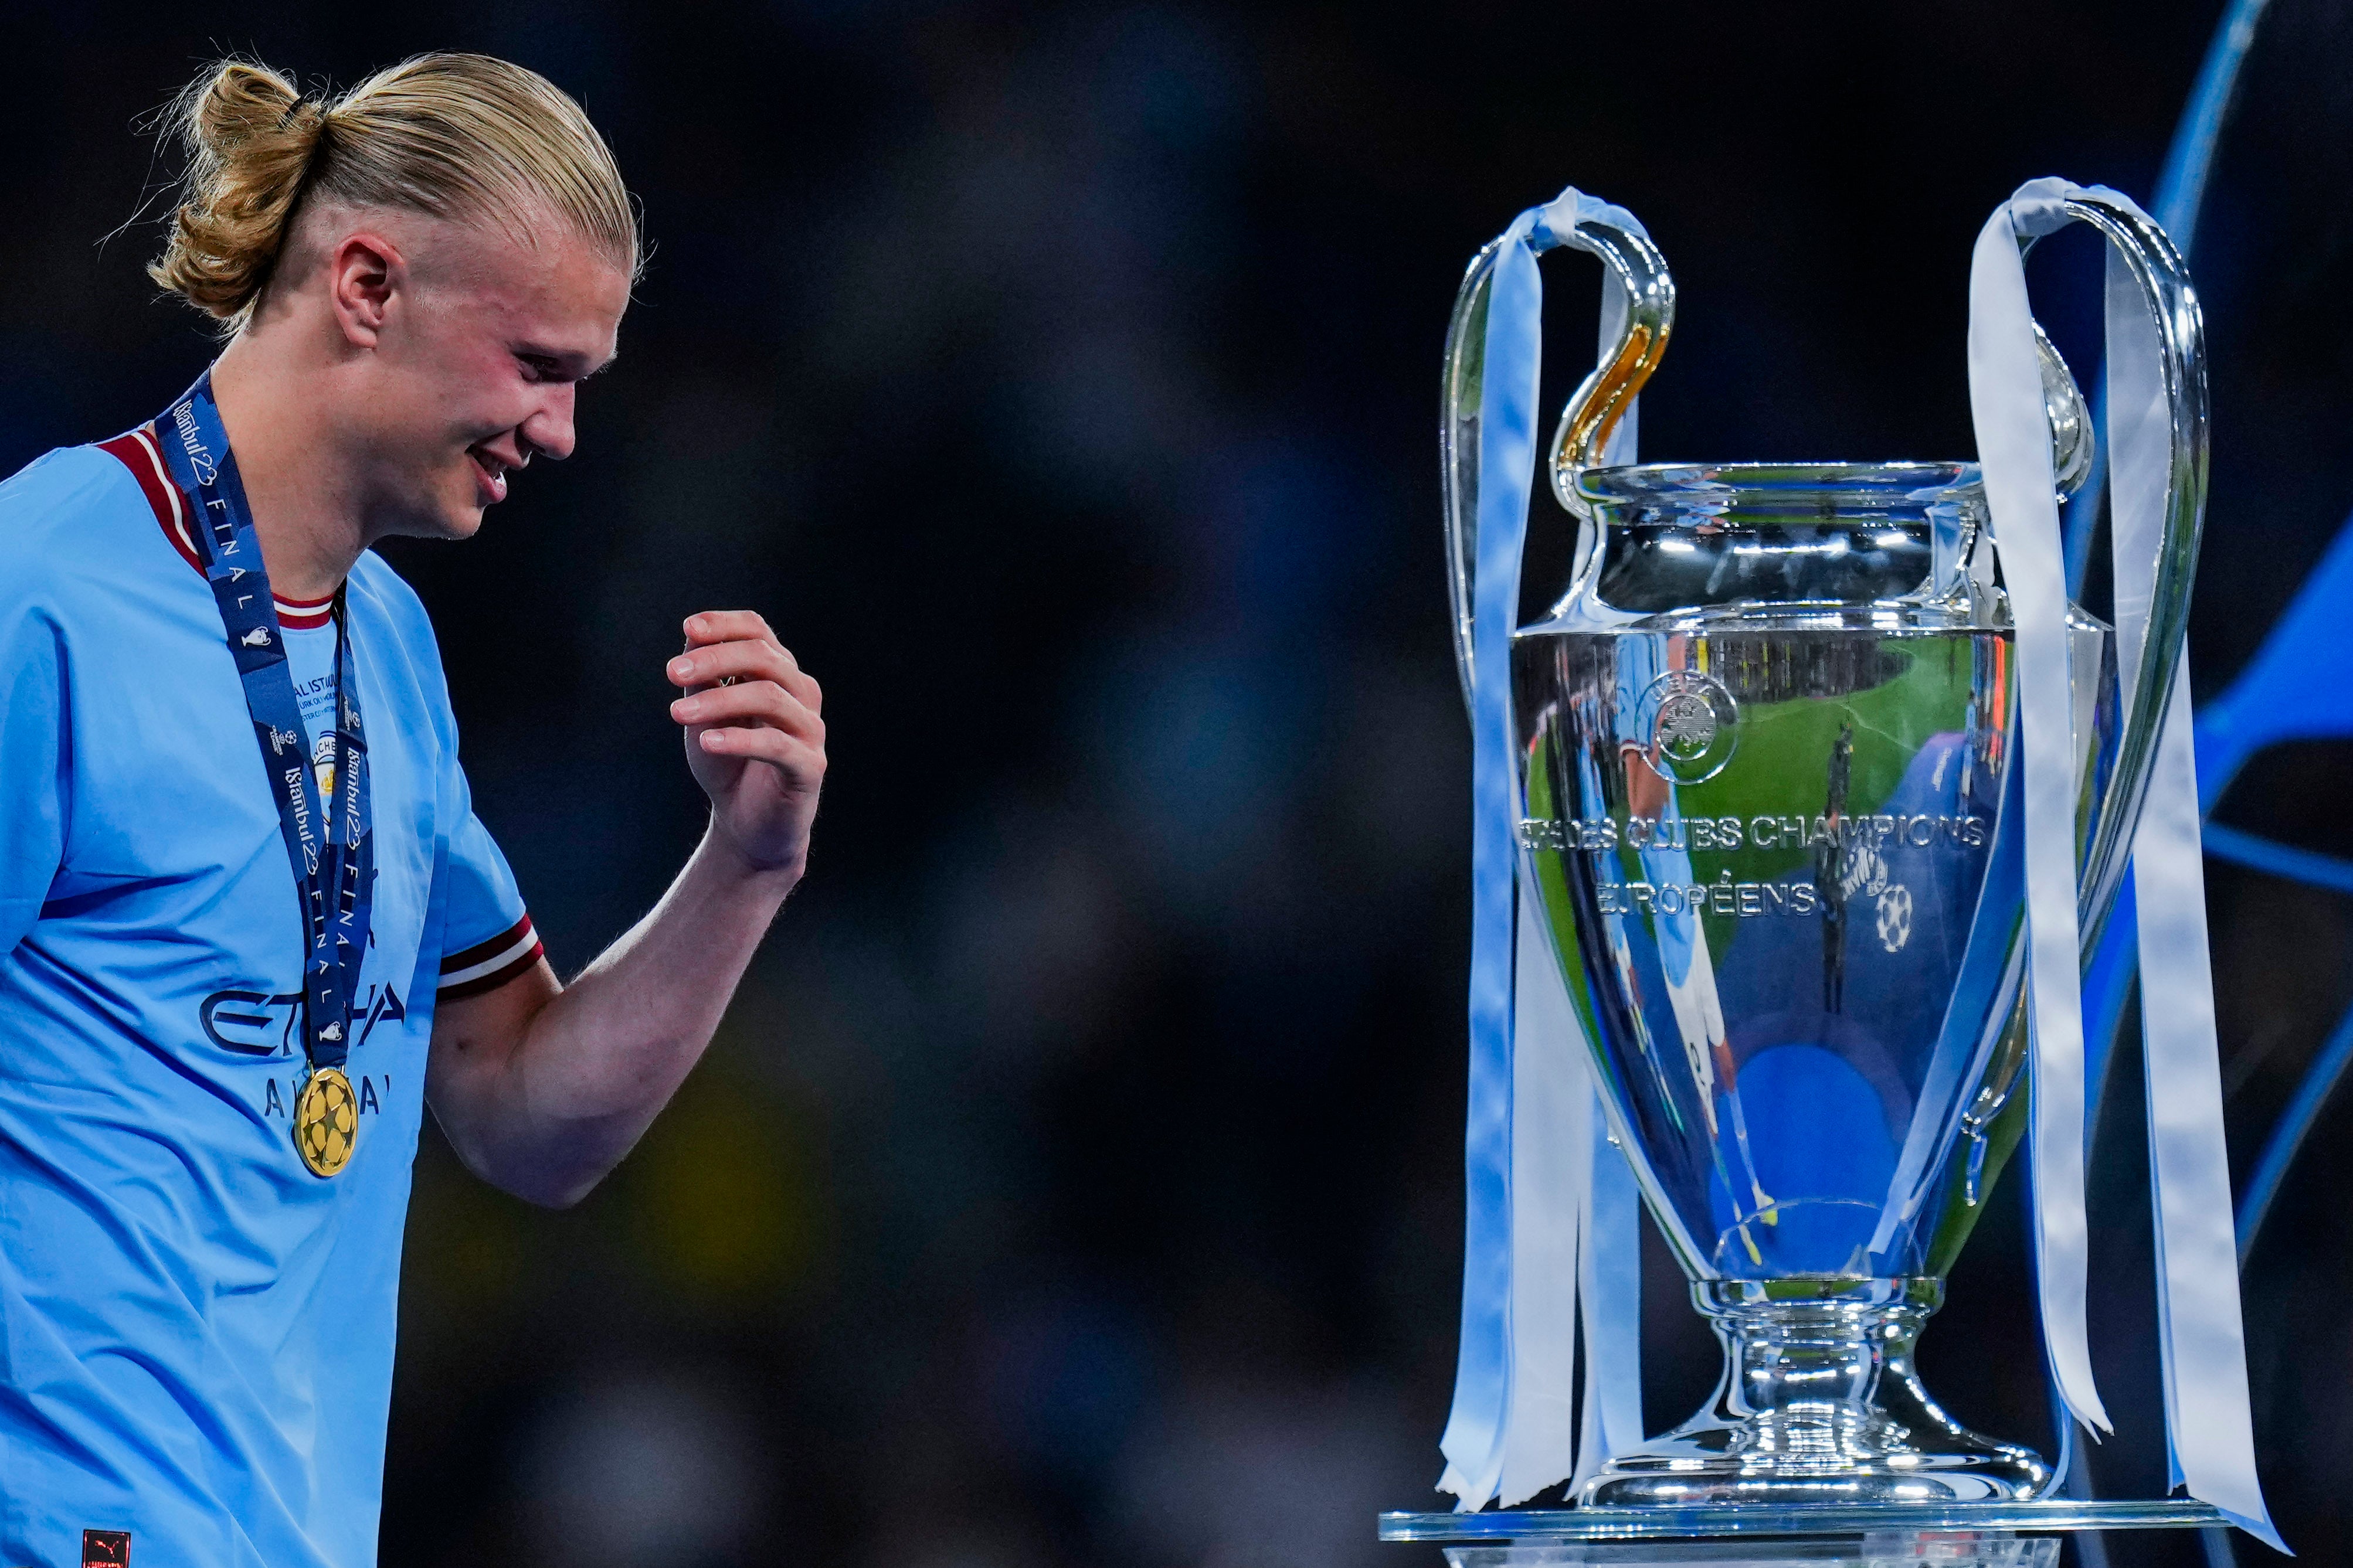 Erling Haaland exceeded expectations in his first season at Manchester City